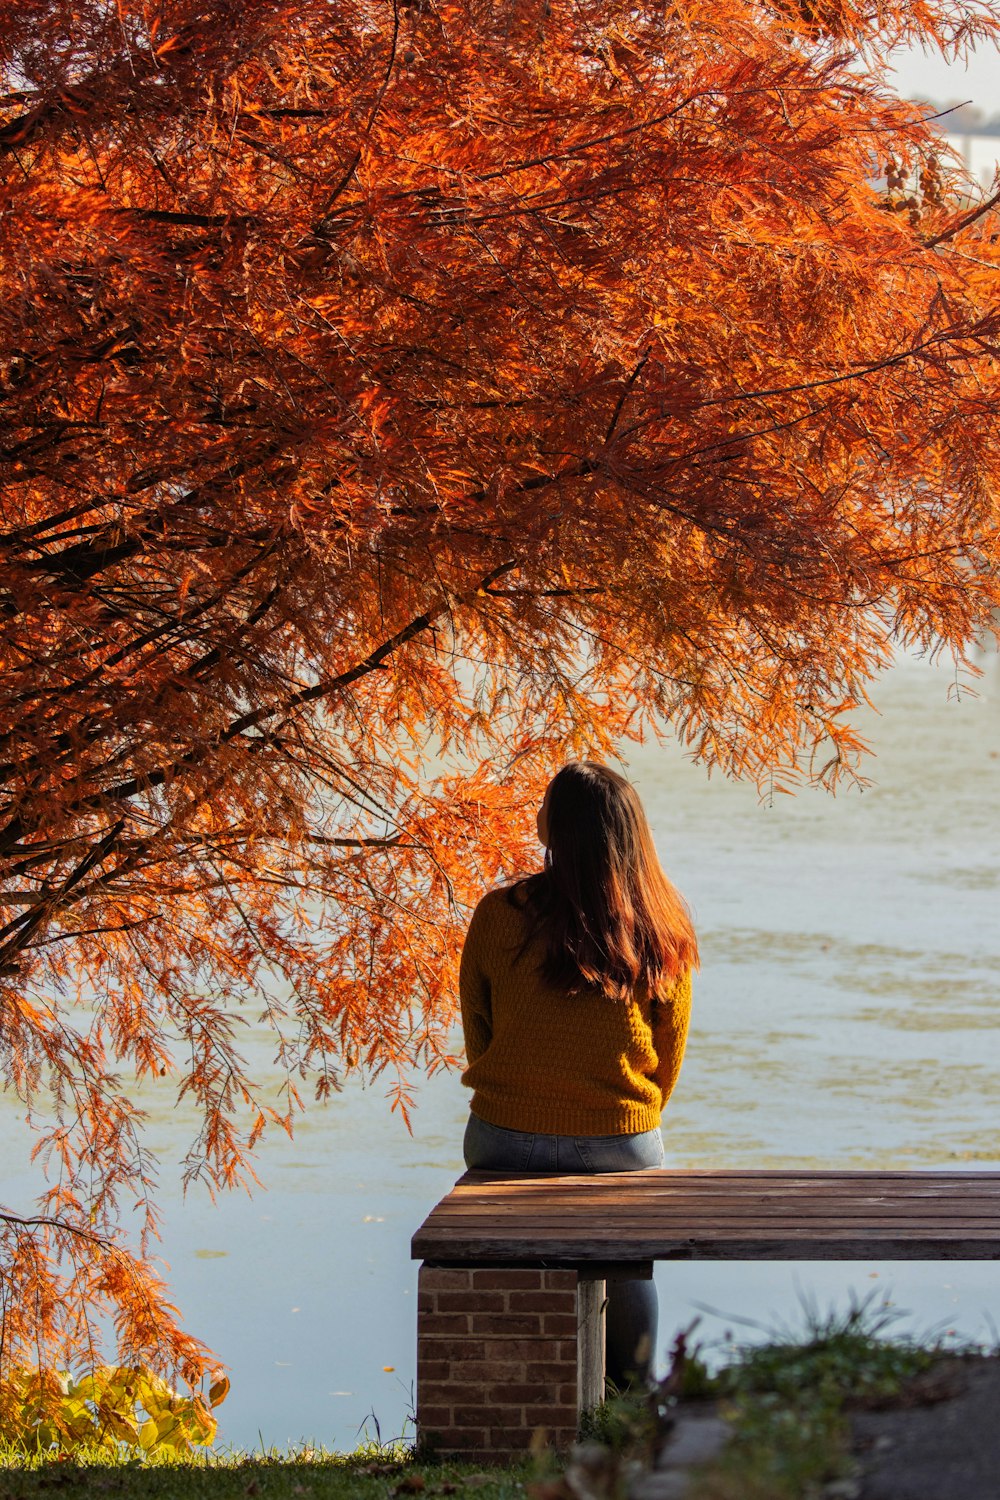 a person sitting on a bench looking at a tree with orange leaves